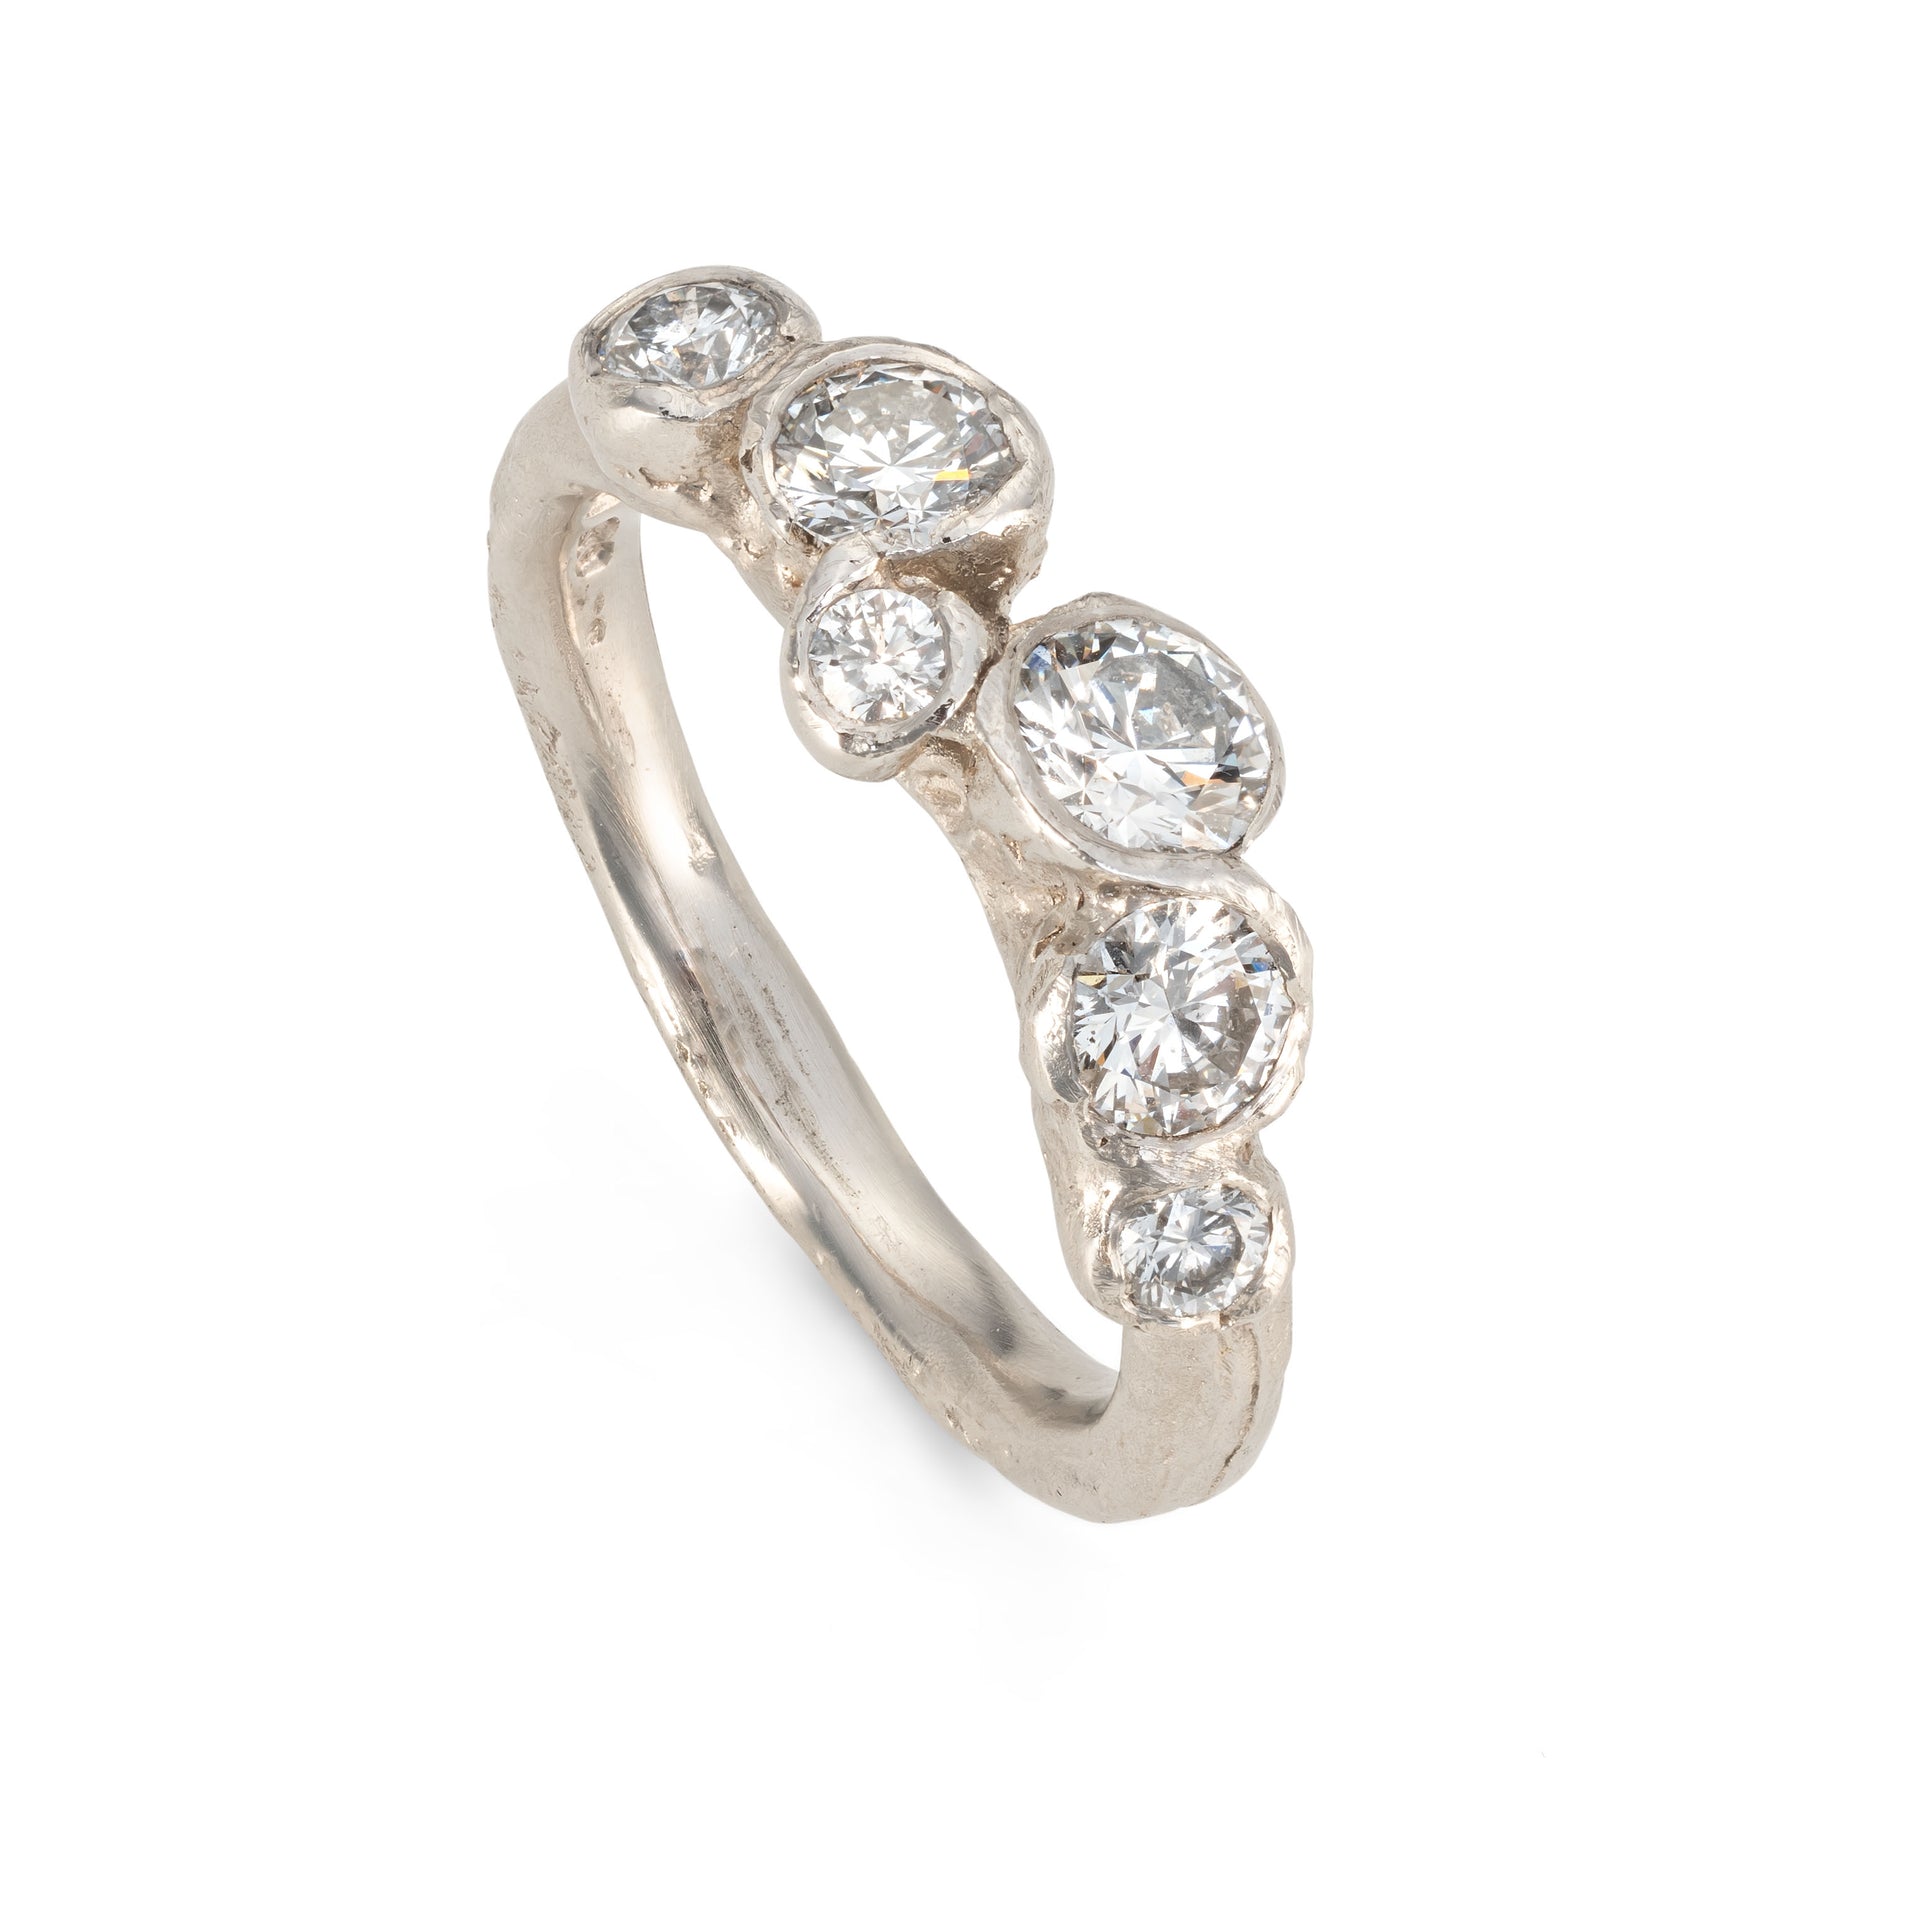 Upright view of a platinum engagement ring with 6 diamonds, created by Emily Nixon in Cornwall.